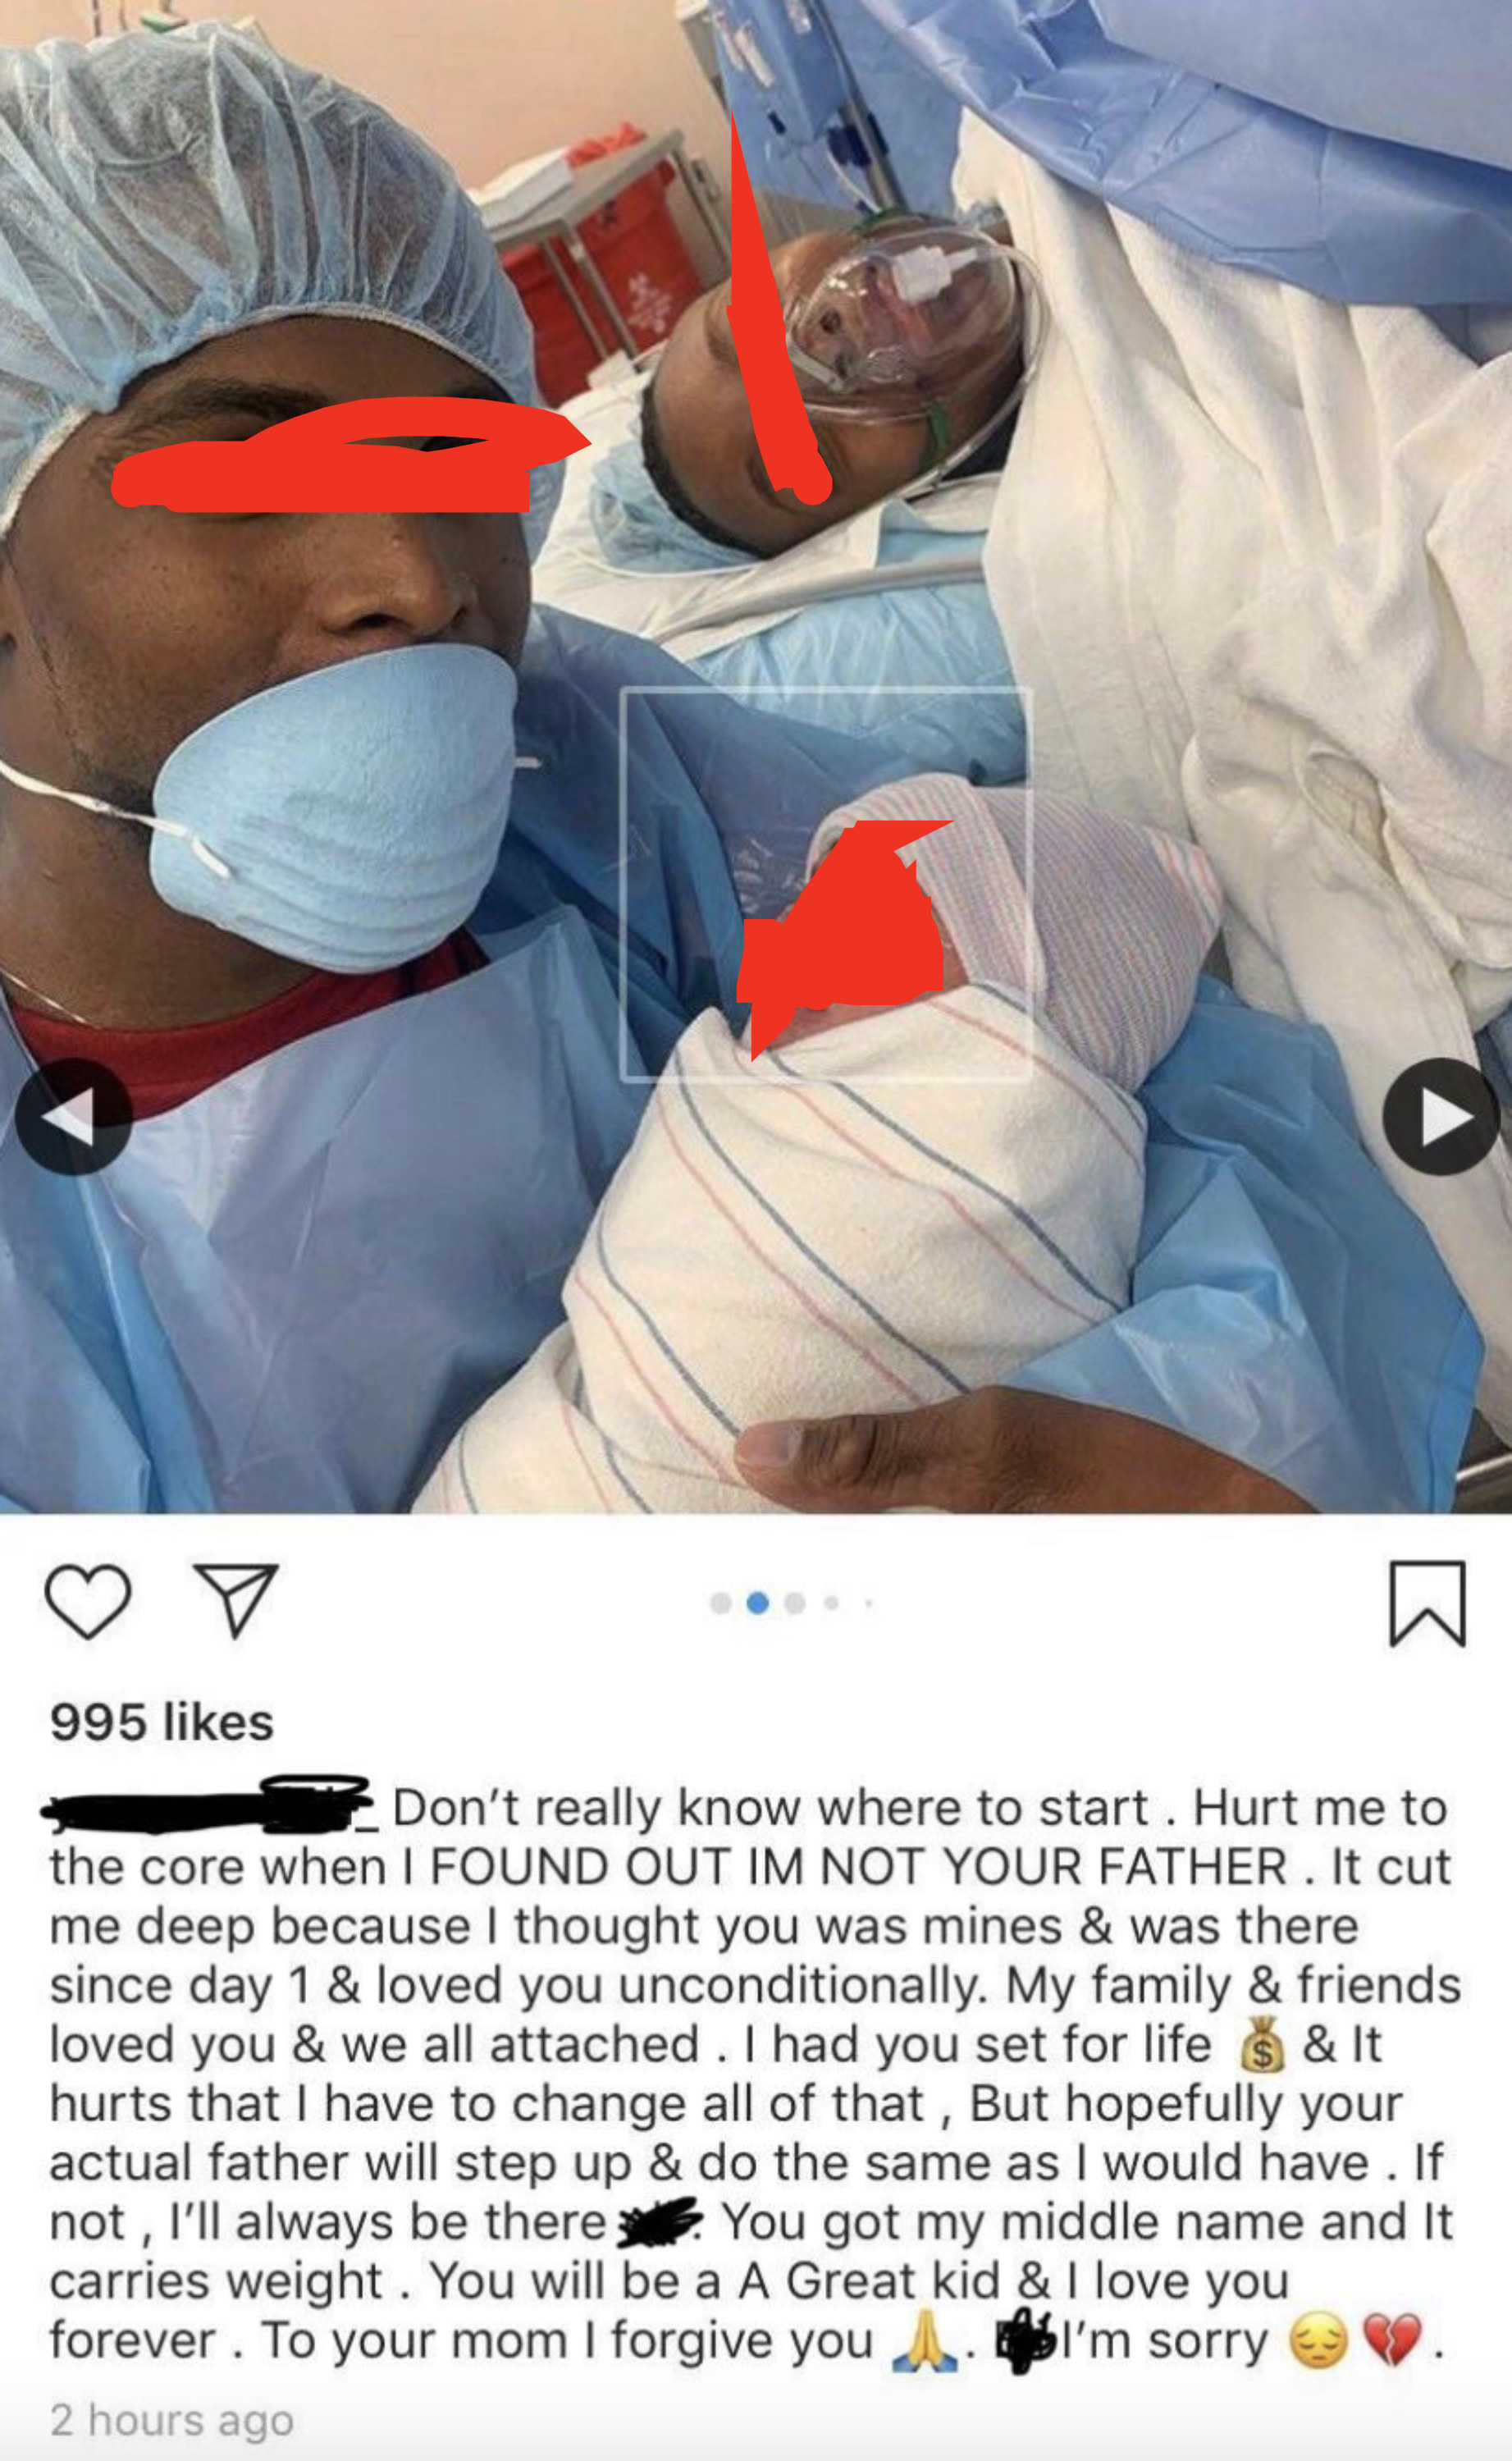 Man holding newborn son he believes he fathered